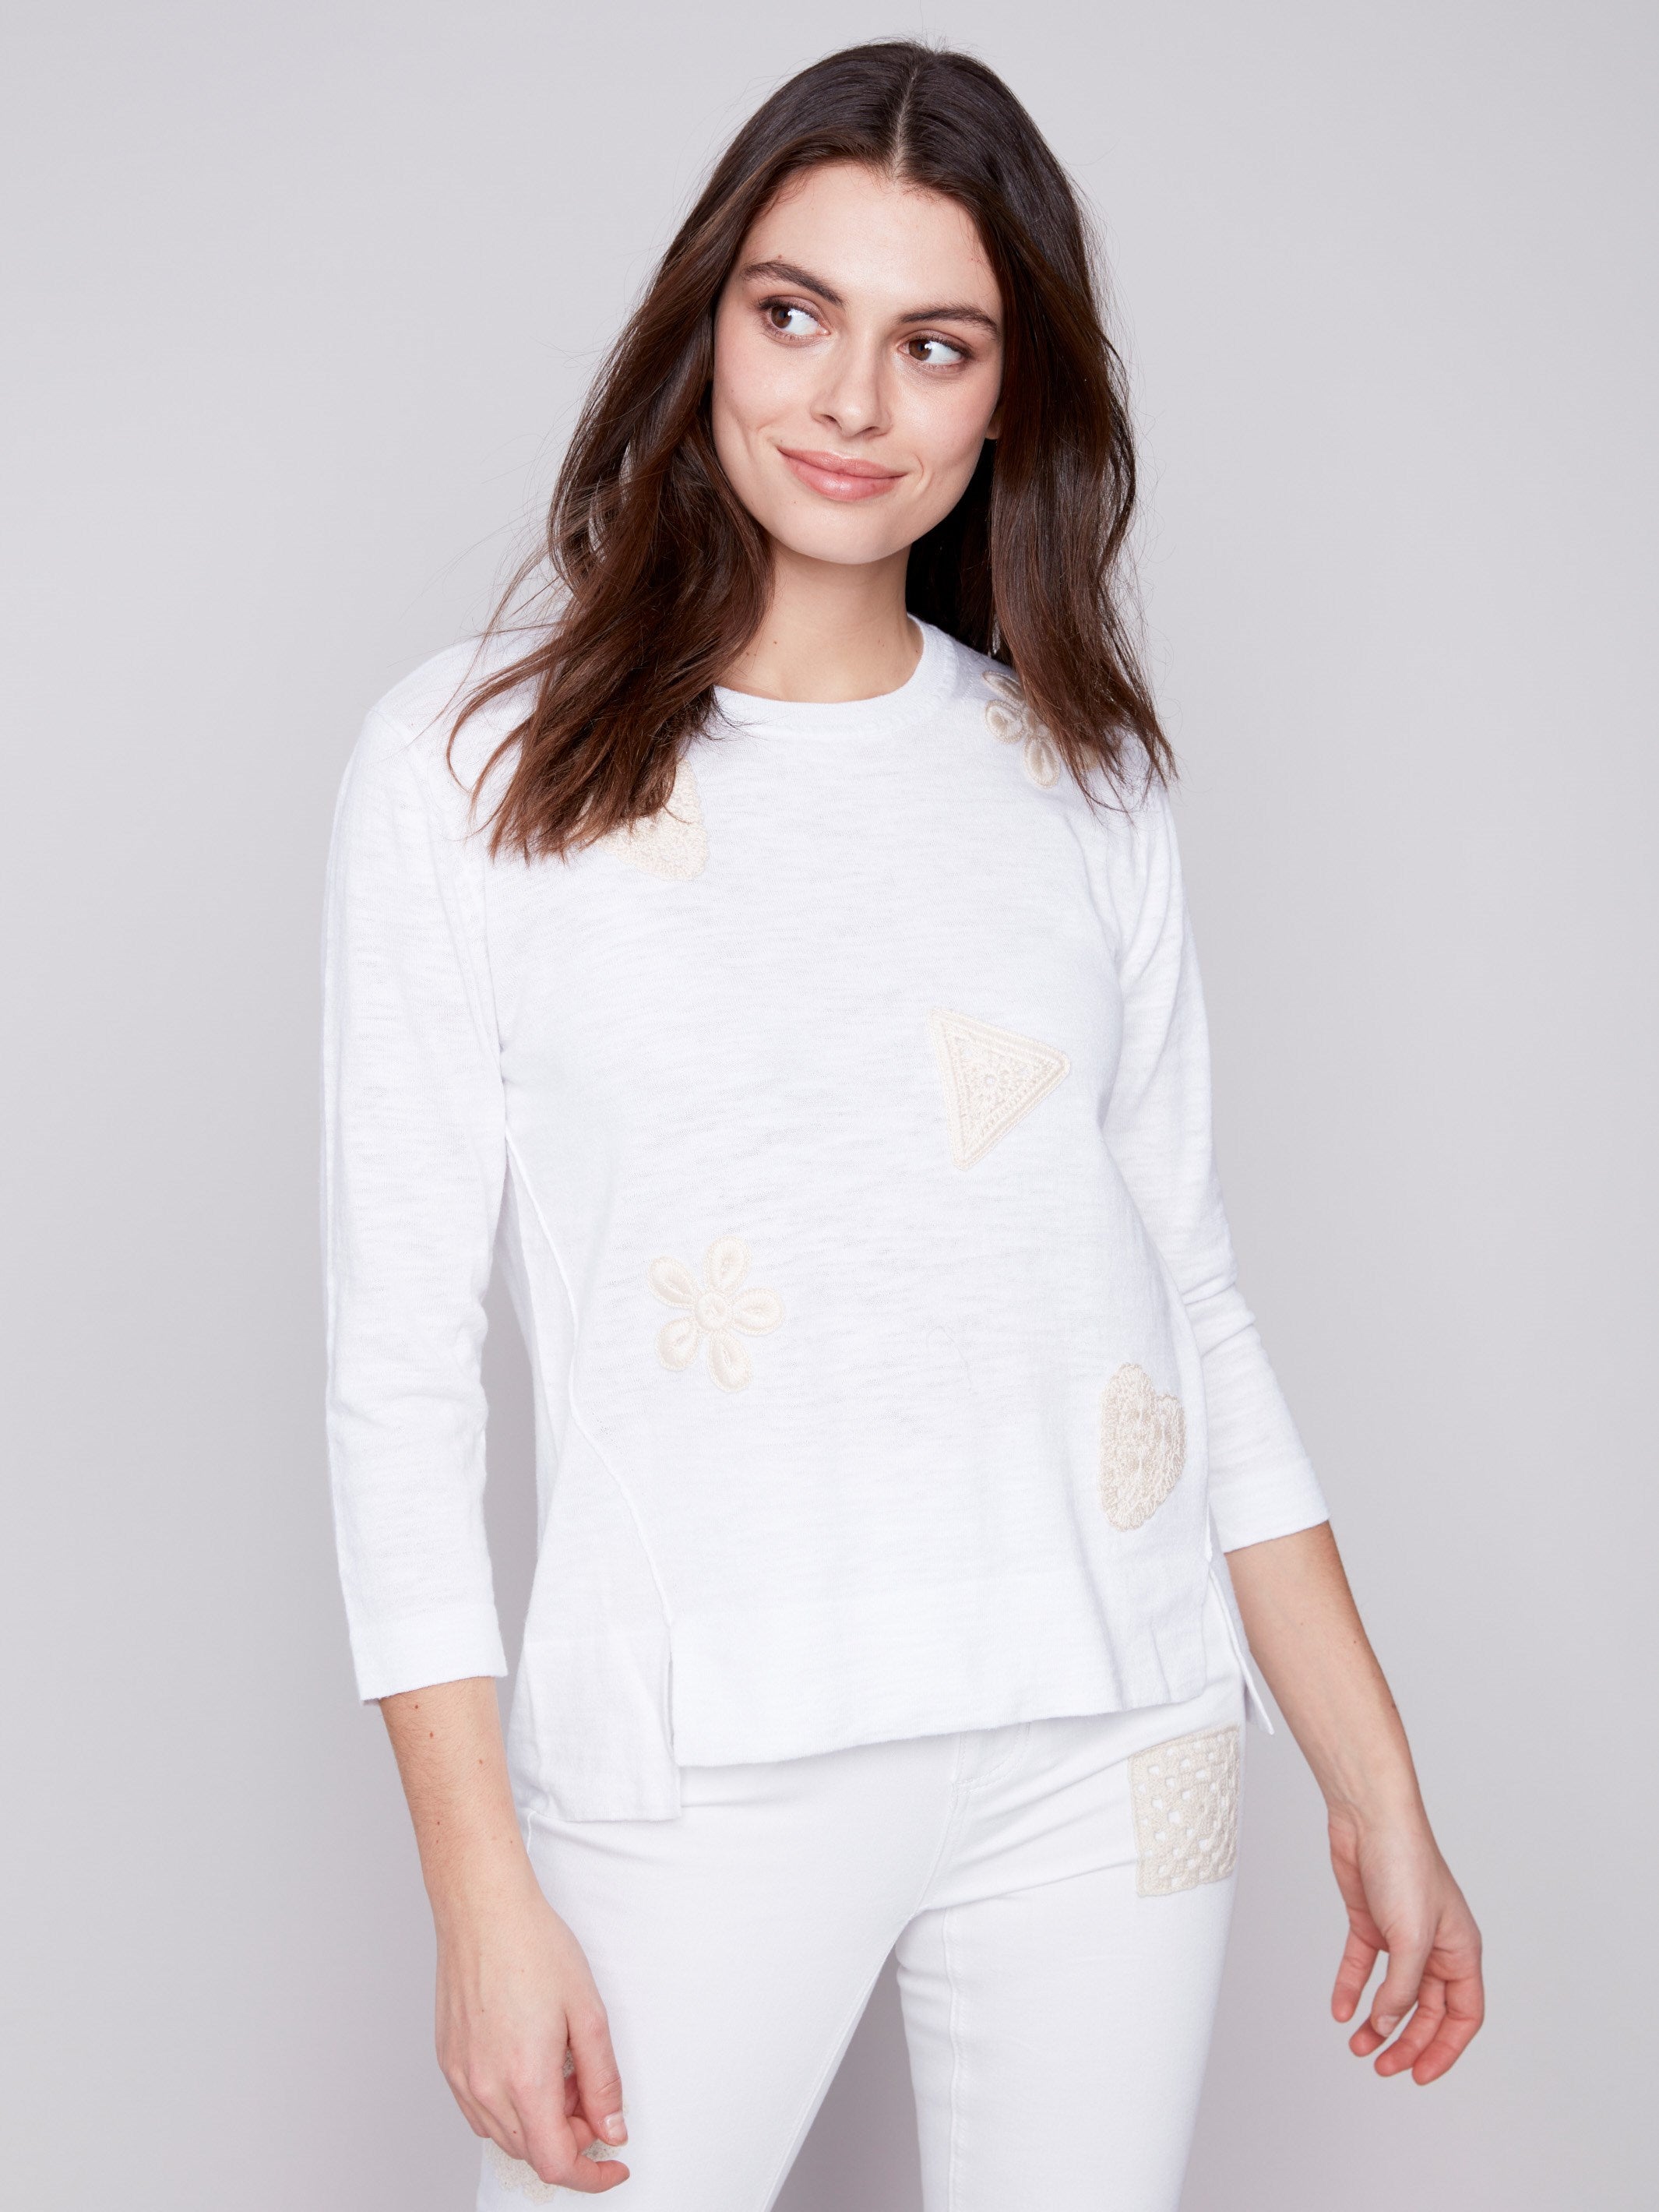 Women's knitted sweater Charlie with alpaca- Marlot Paris